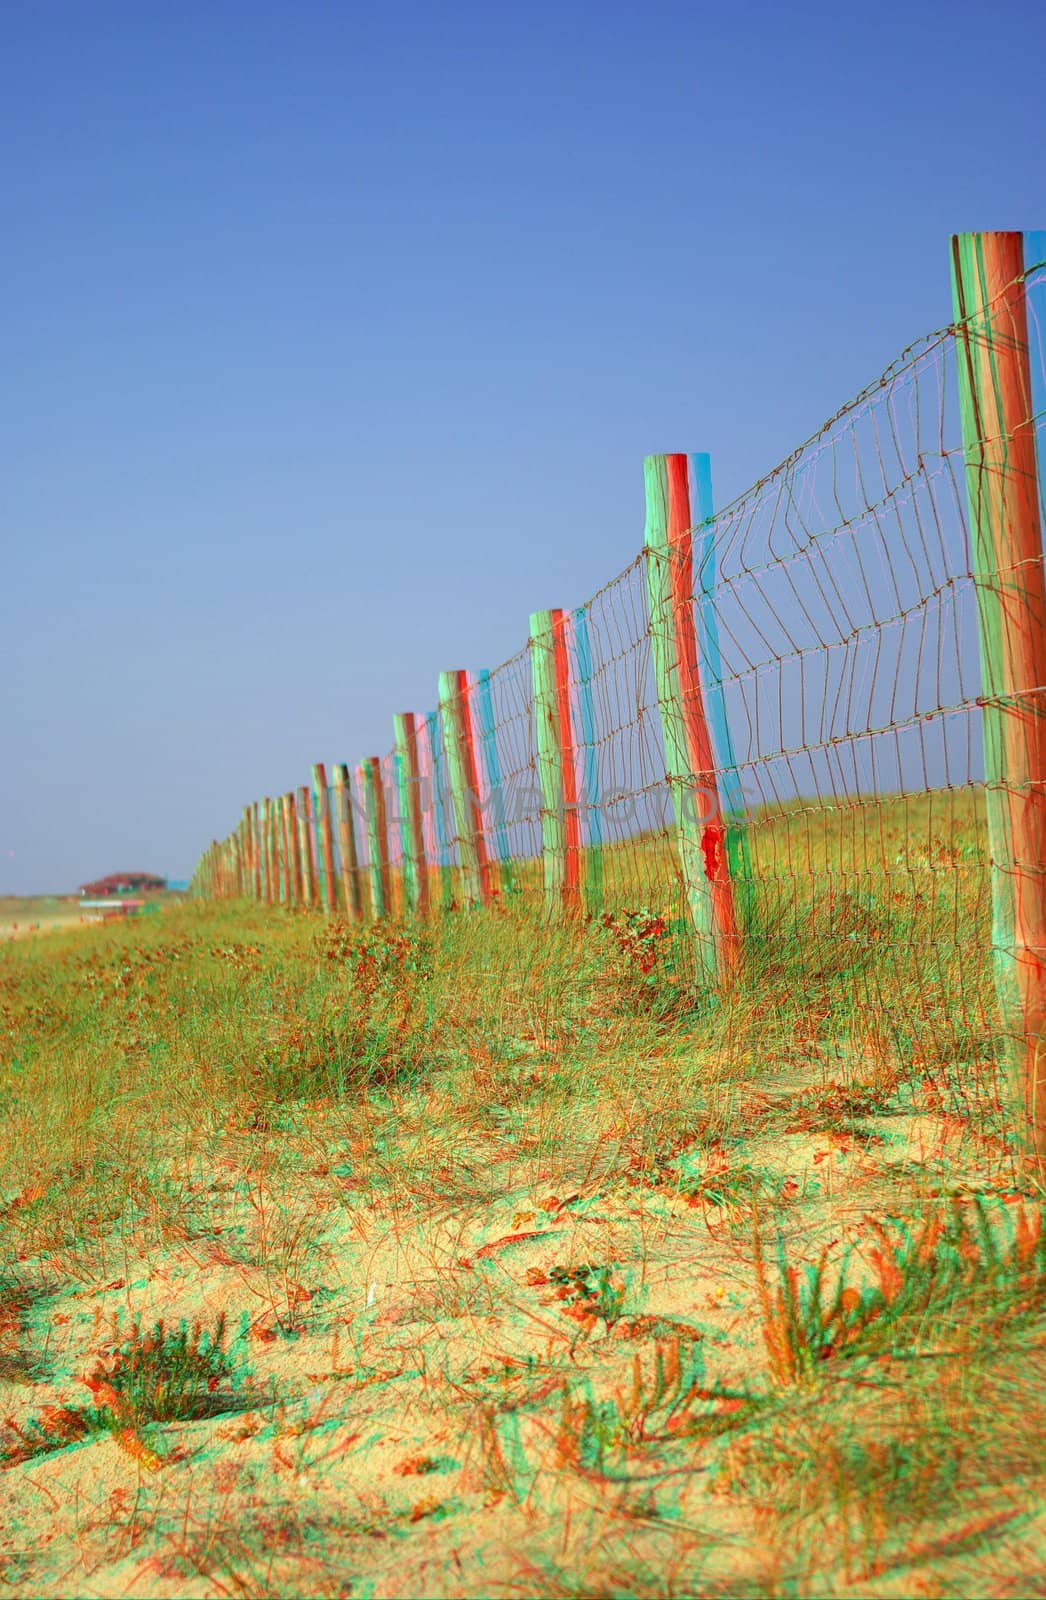 Wood post barrier foreground to background on dunes with little vegetation and with a real stereoscopic effect